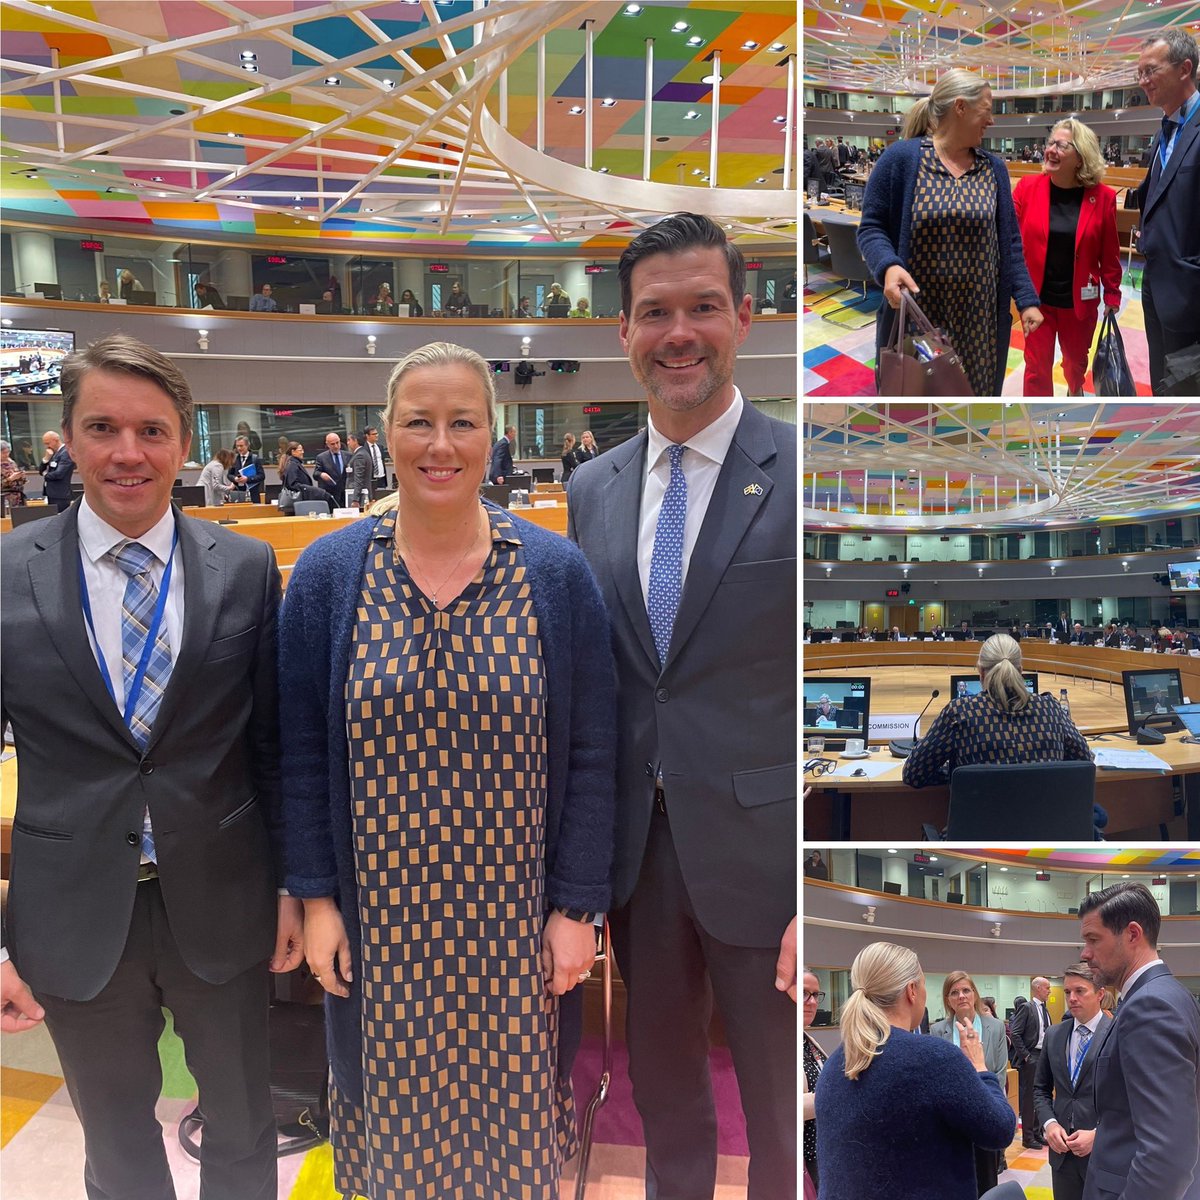 Ahead of @_AfricanUnion and @EU_Commission meeting today, Development Ministers discussed roll-out of 🇪🇺 positive, sustainable #GlobalGateway offer to Africa. Tracking progress and visibility are key, I emphasised continued #TeamEurope coordination in the multilateral fora.